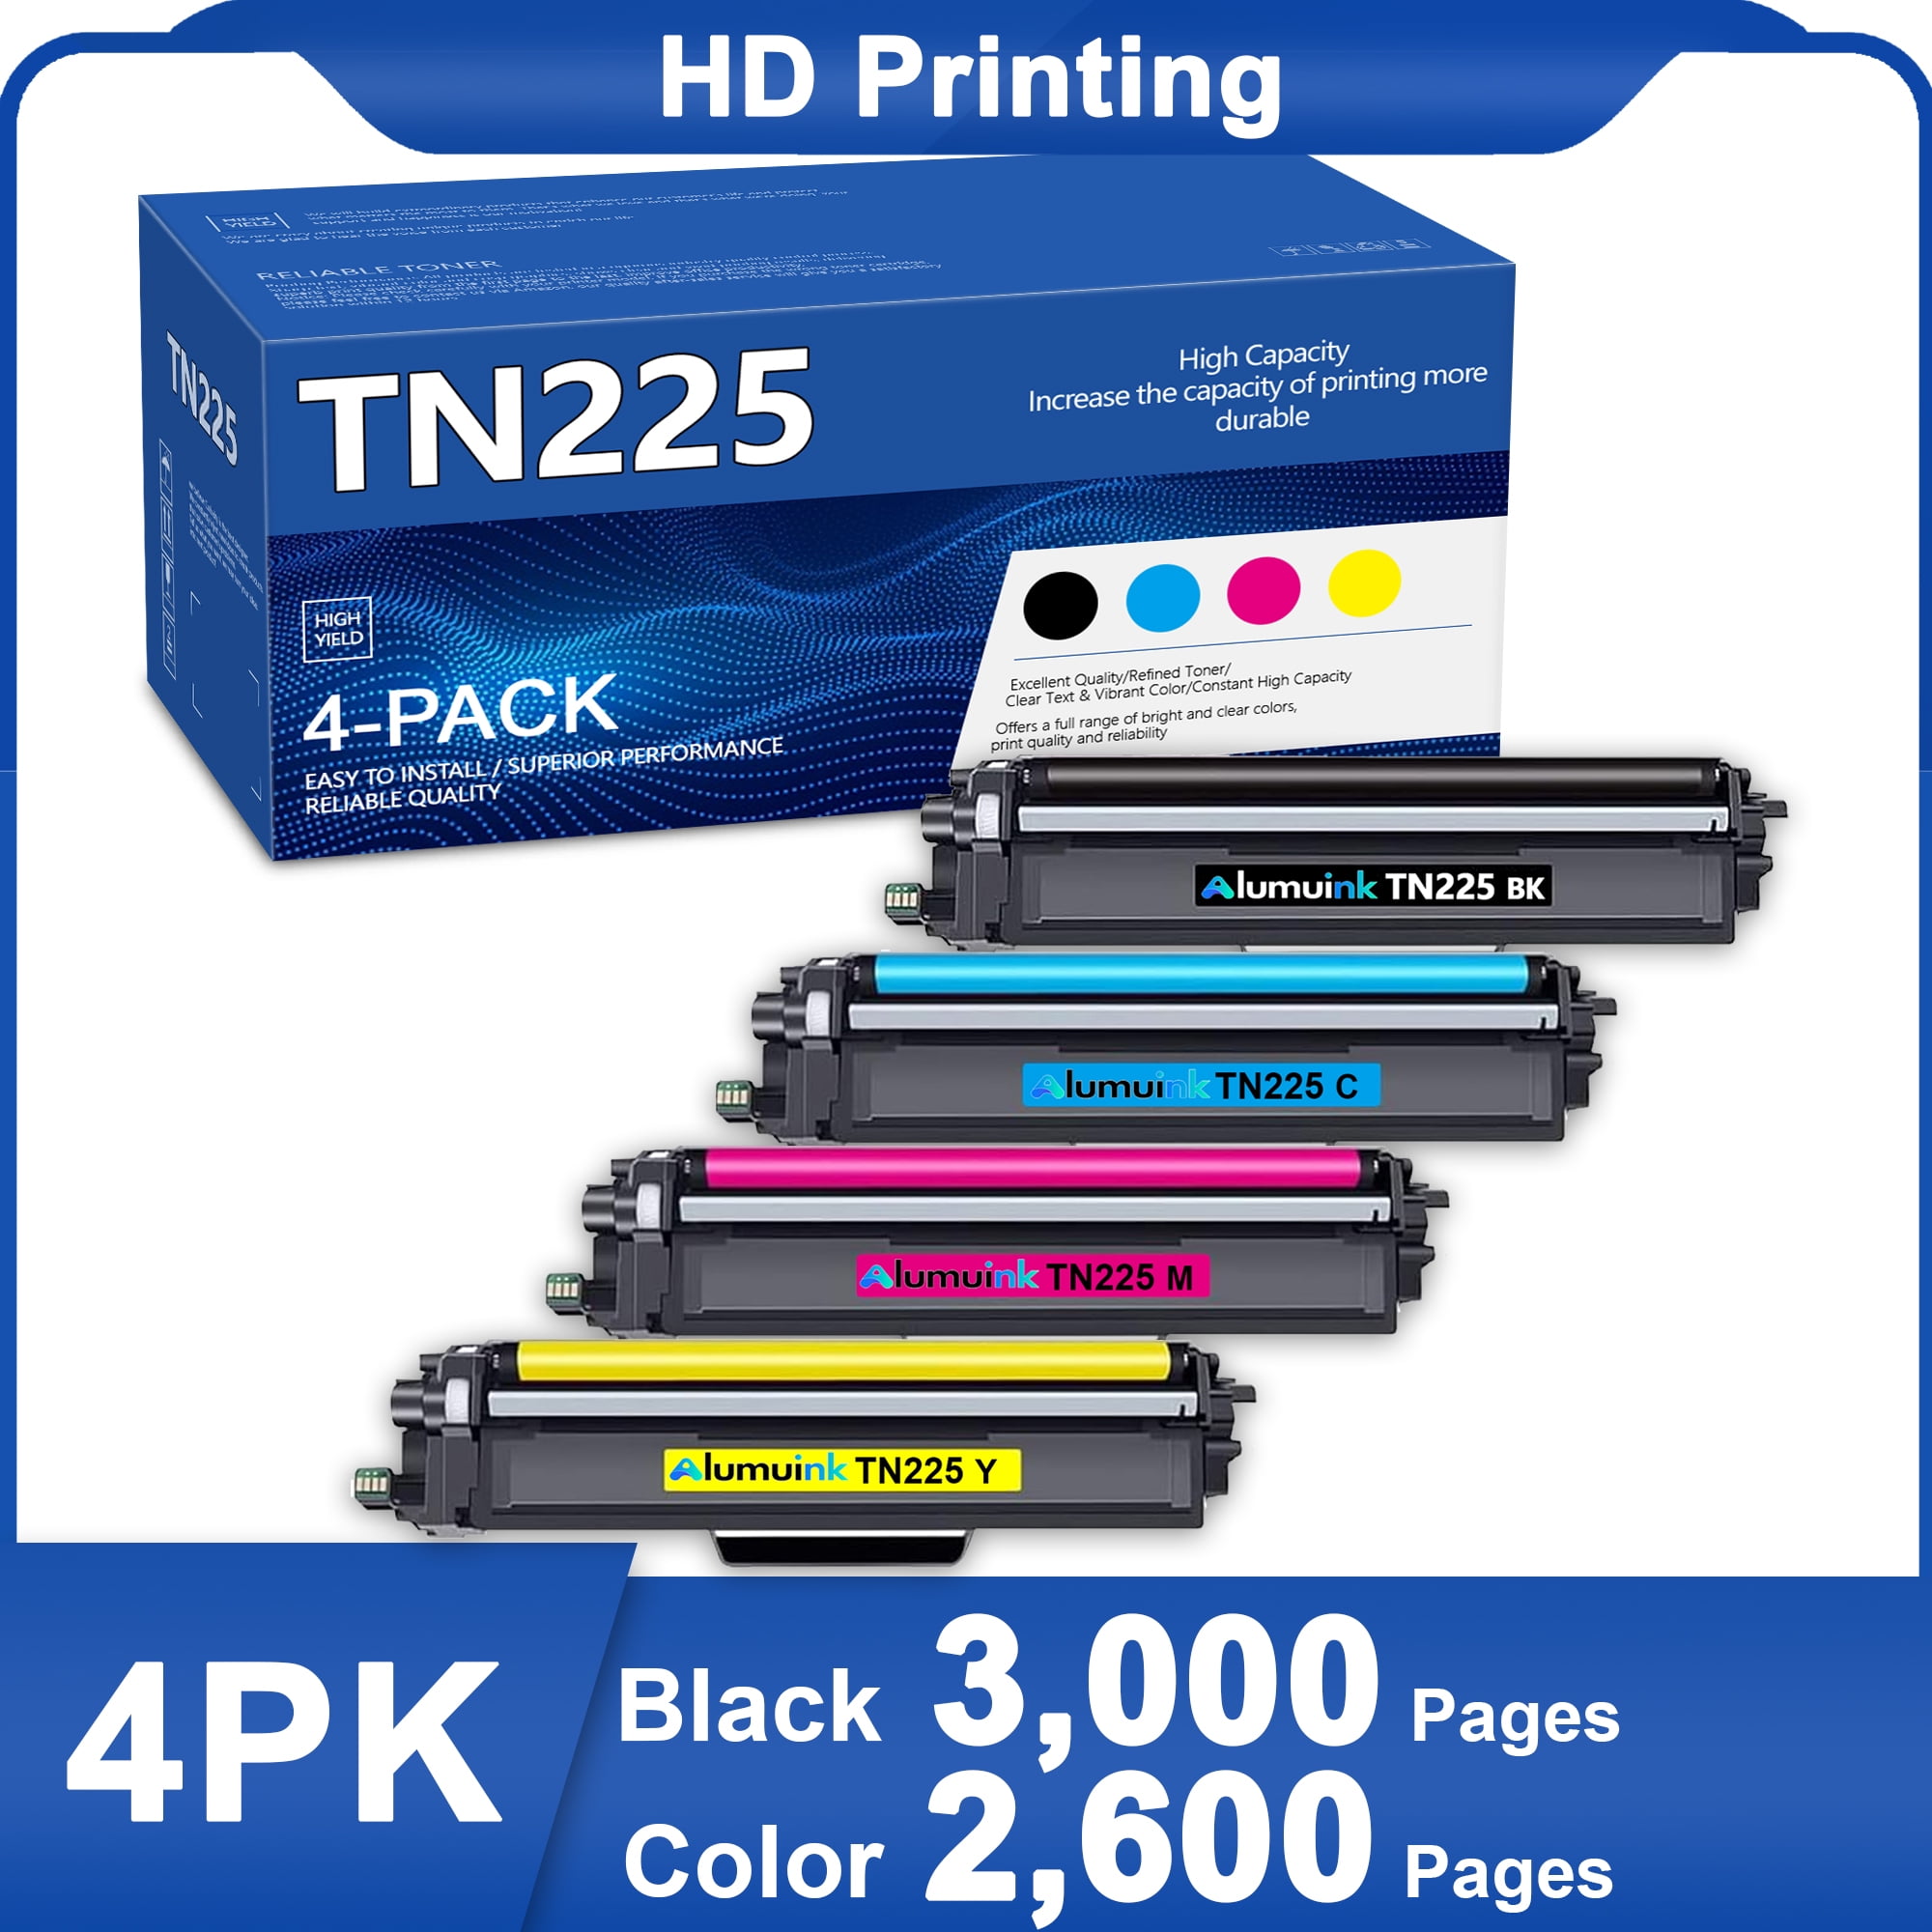 Brother TN-241/TN-245 Recycled 4 Colour Toner Multipack